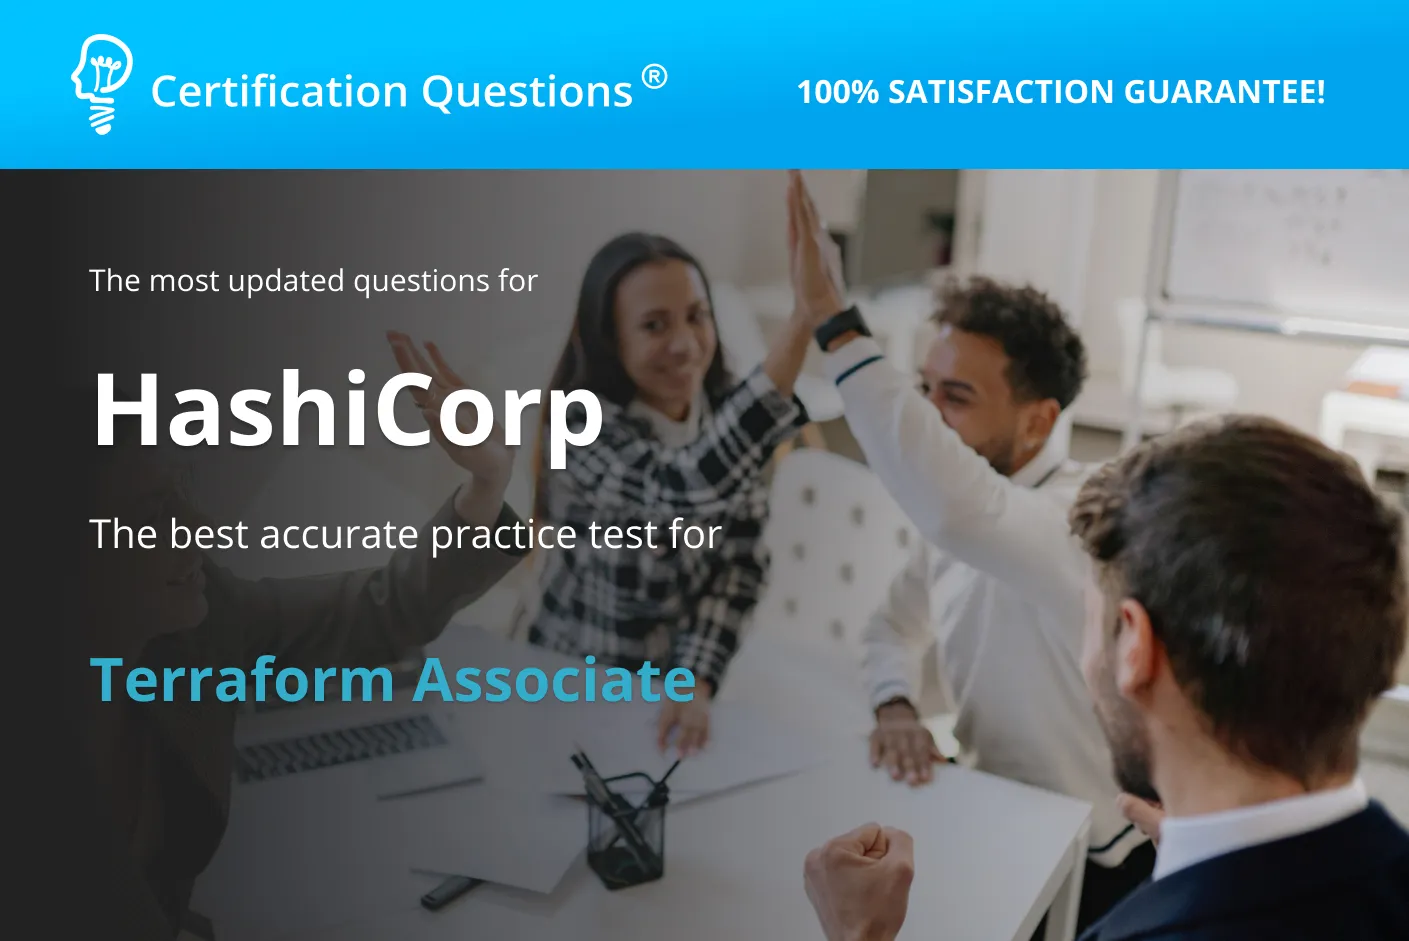 This study guide is related to the HashiCorp certified terraform associate practice test in the United States of America.